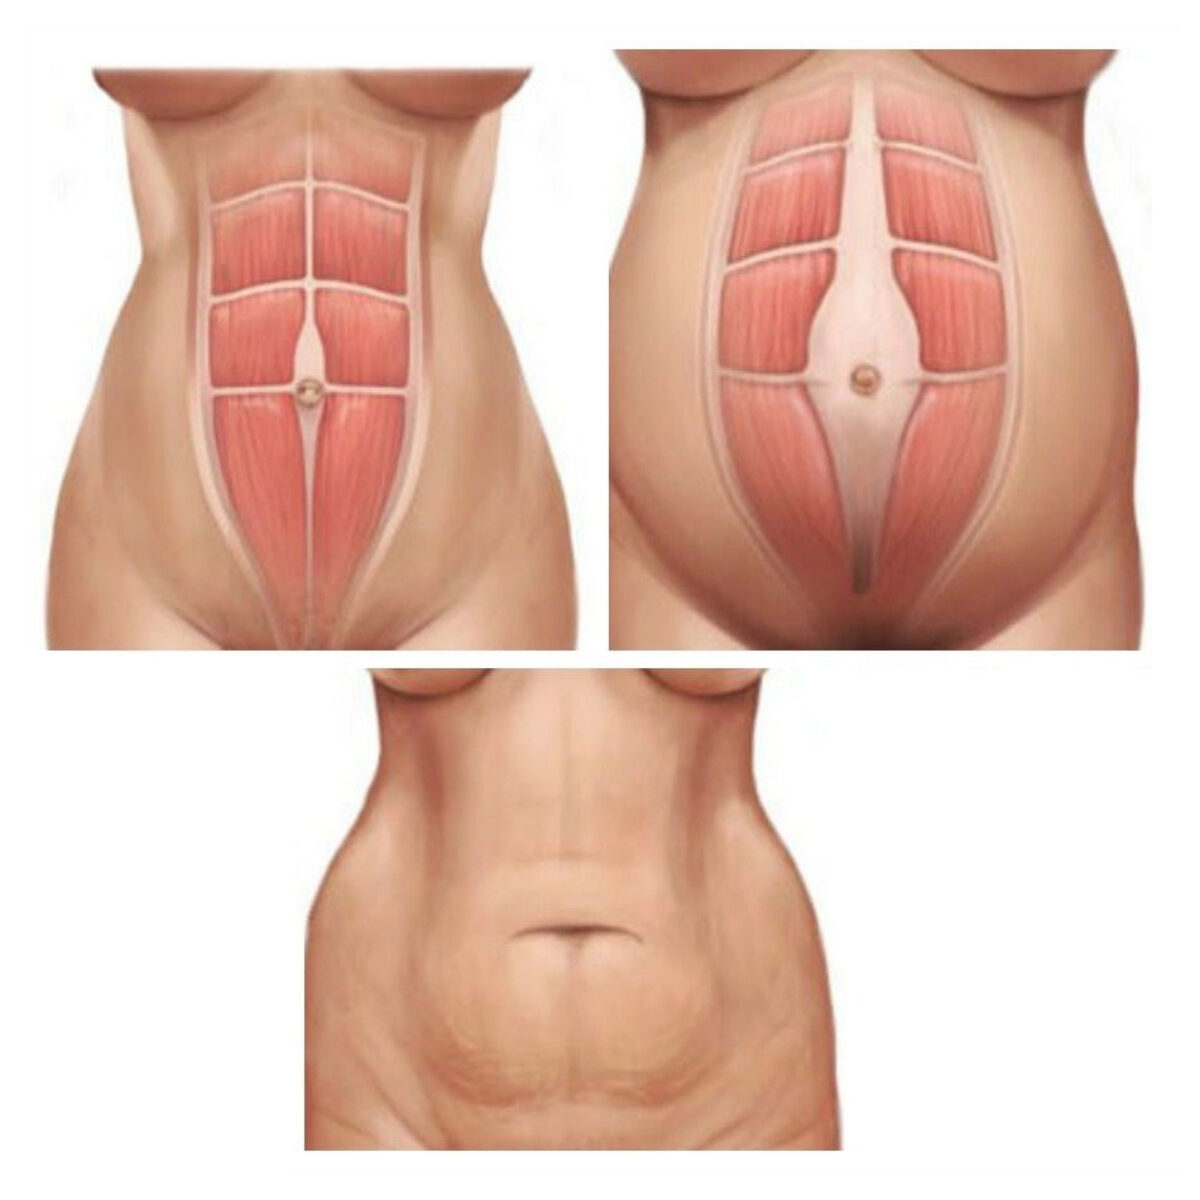 Mind the gap: How to treat post-pregnancy abdominal muscle